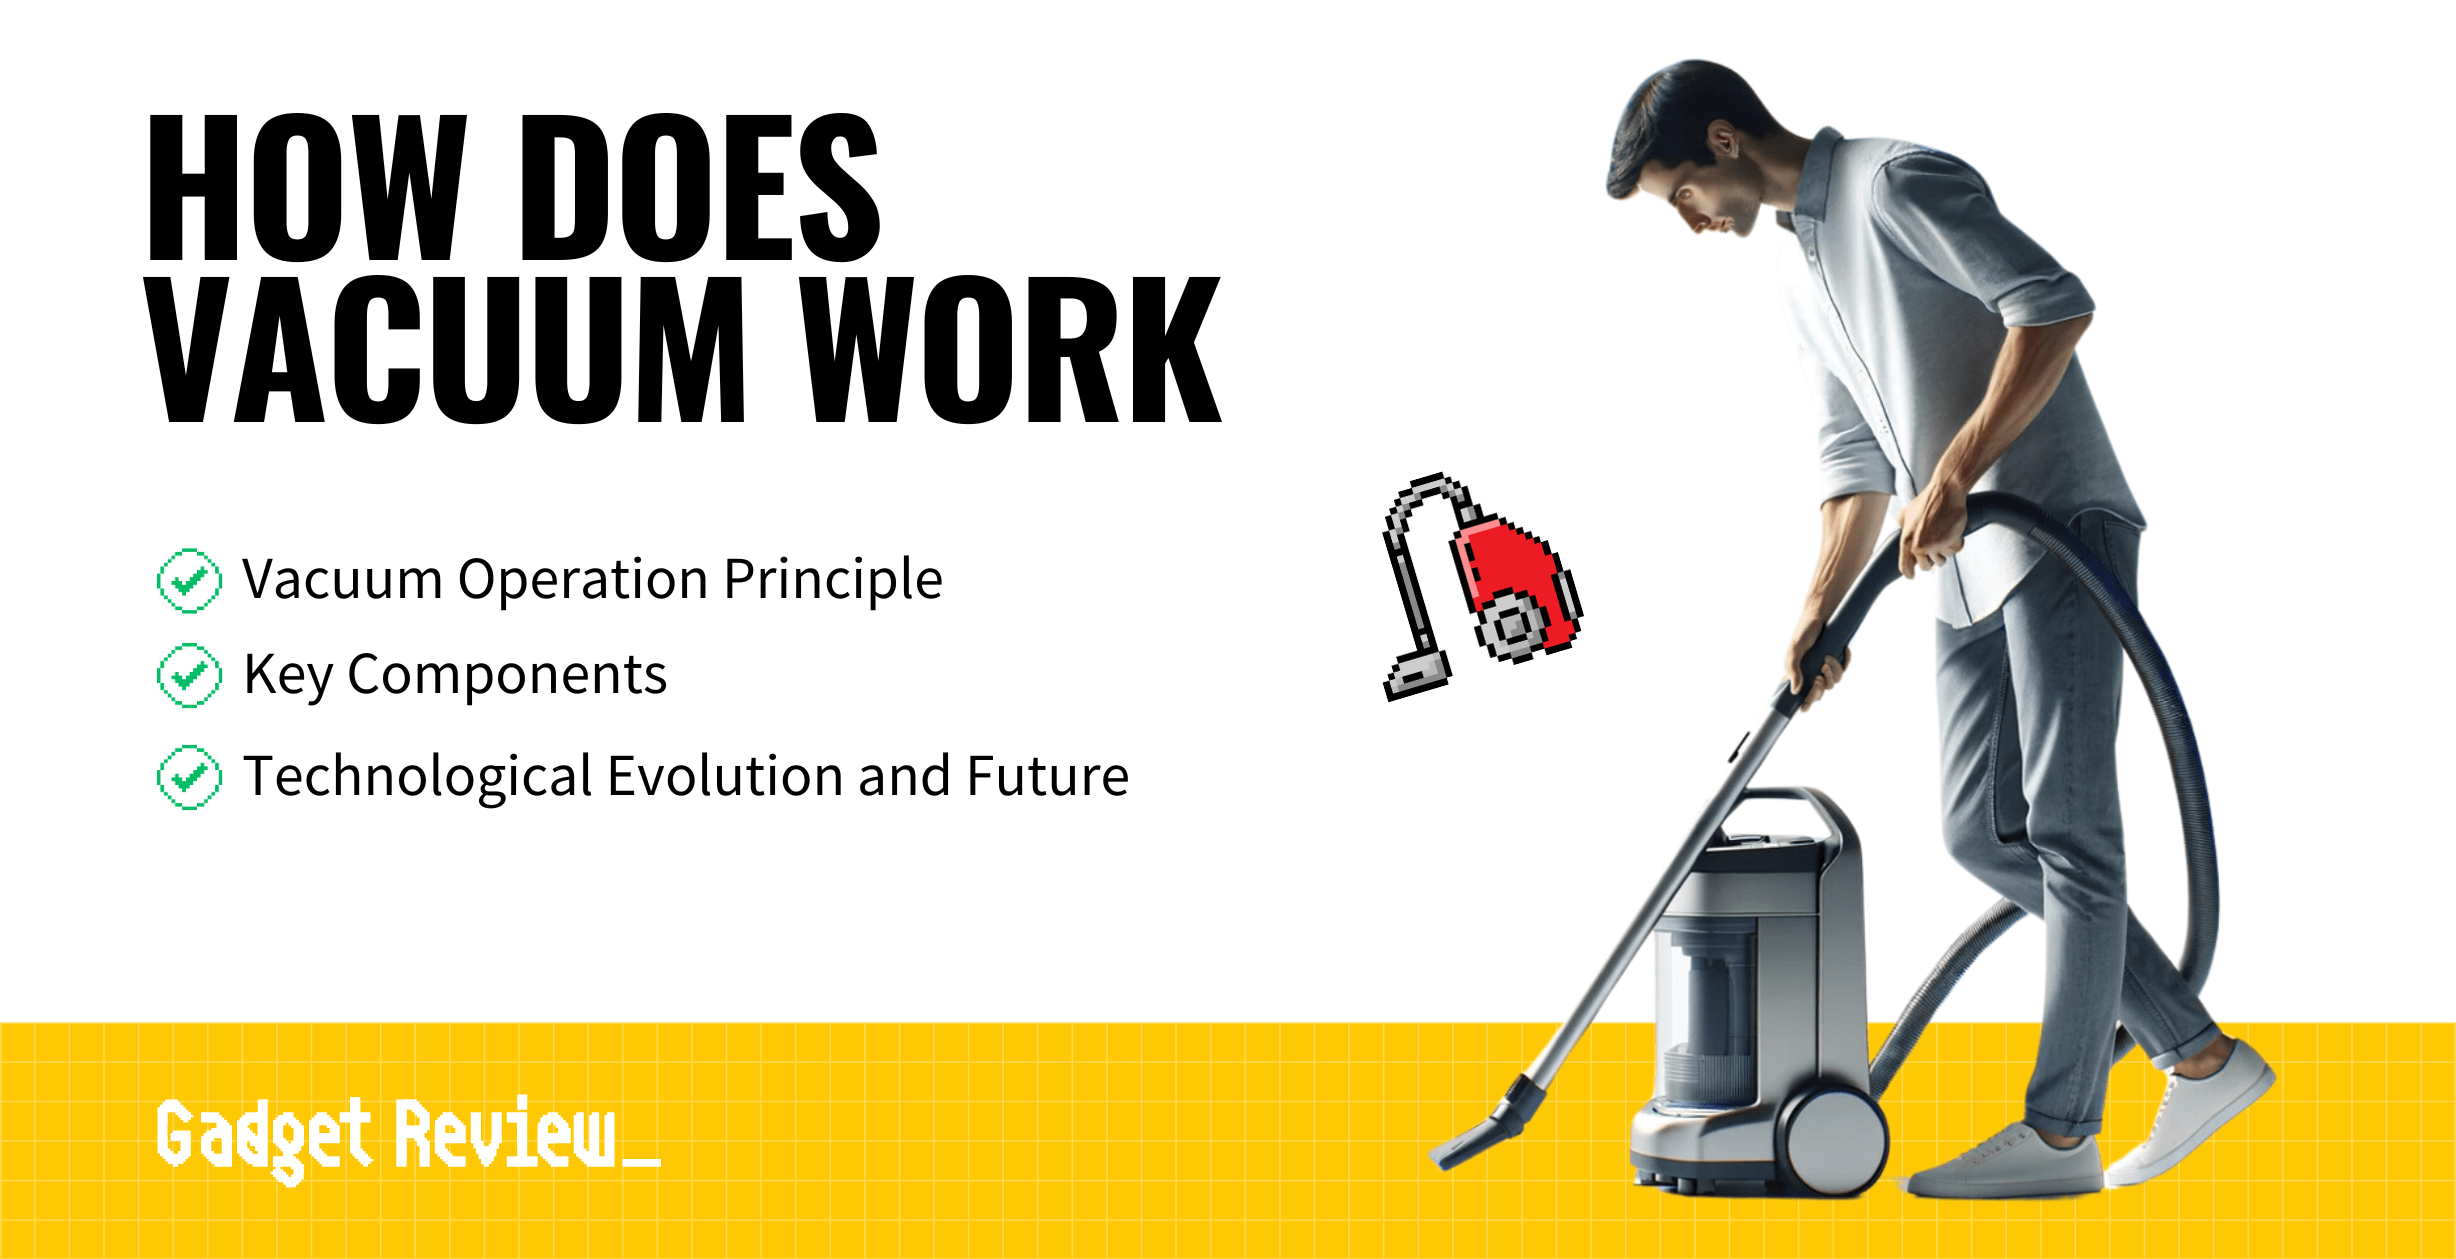 How Does a Vacuum Work?